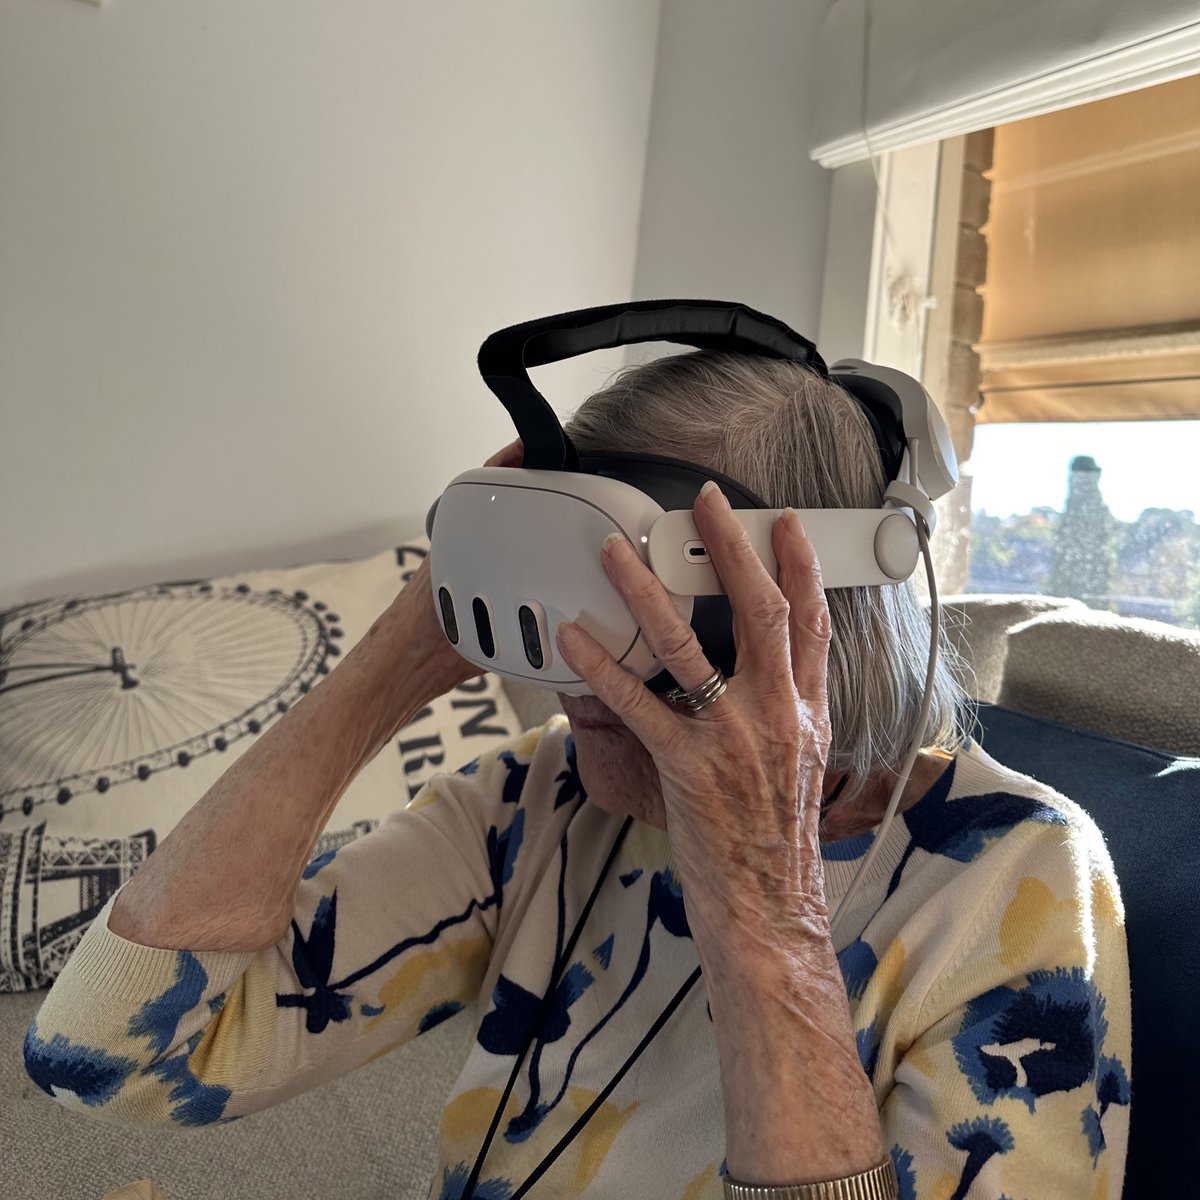 My grandma (97) absolutely dug her first VR experiences. Happy Mother’s Day, all!